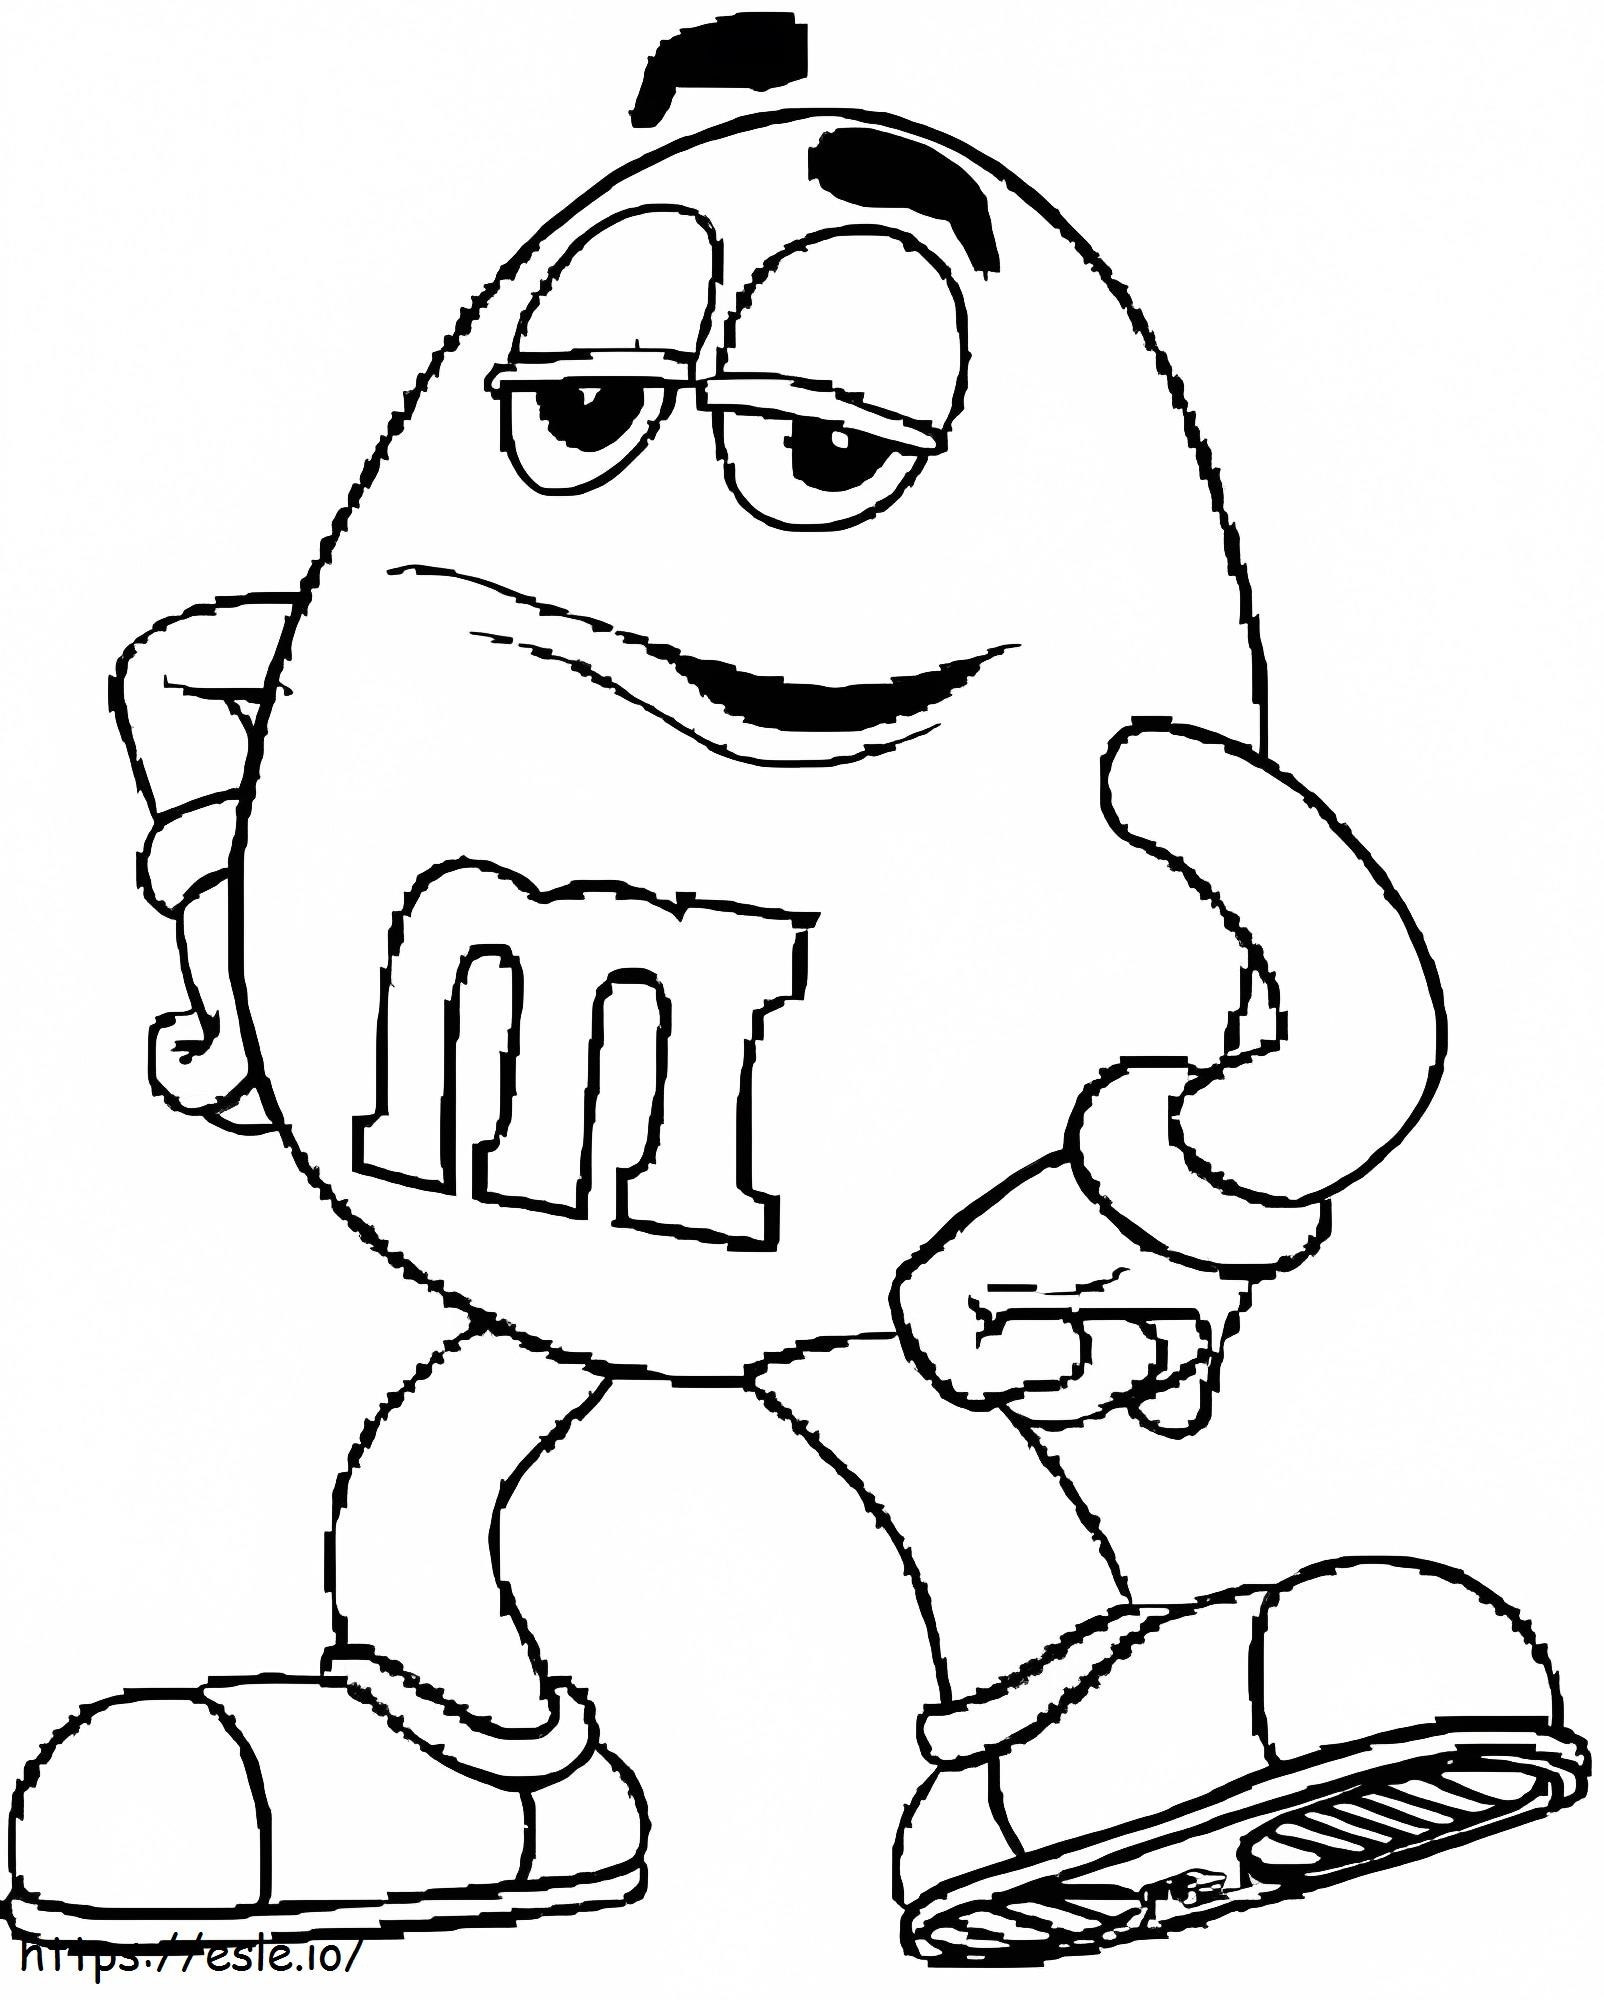 Funny Mm coloring page